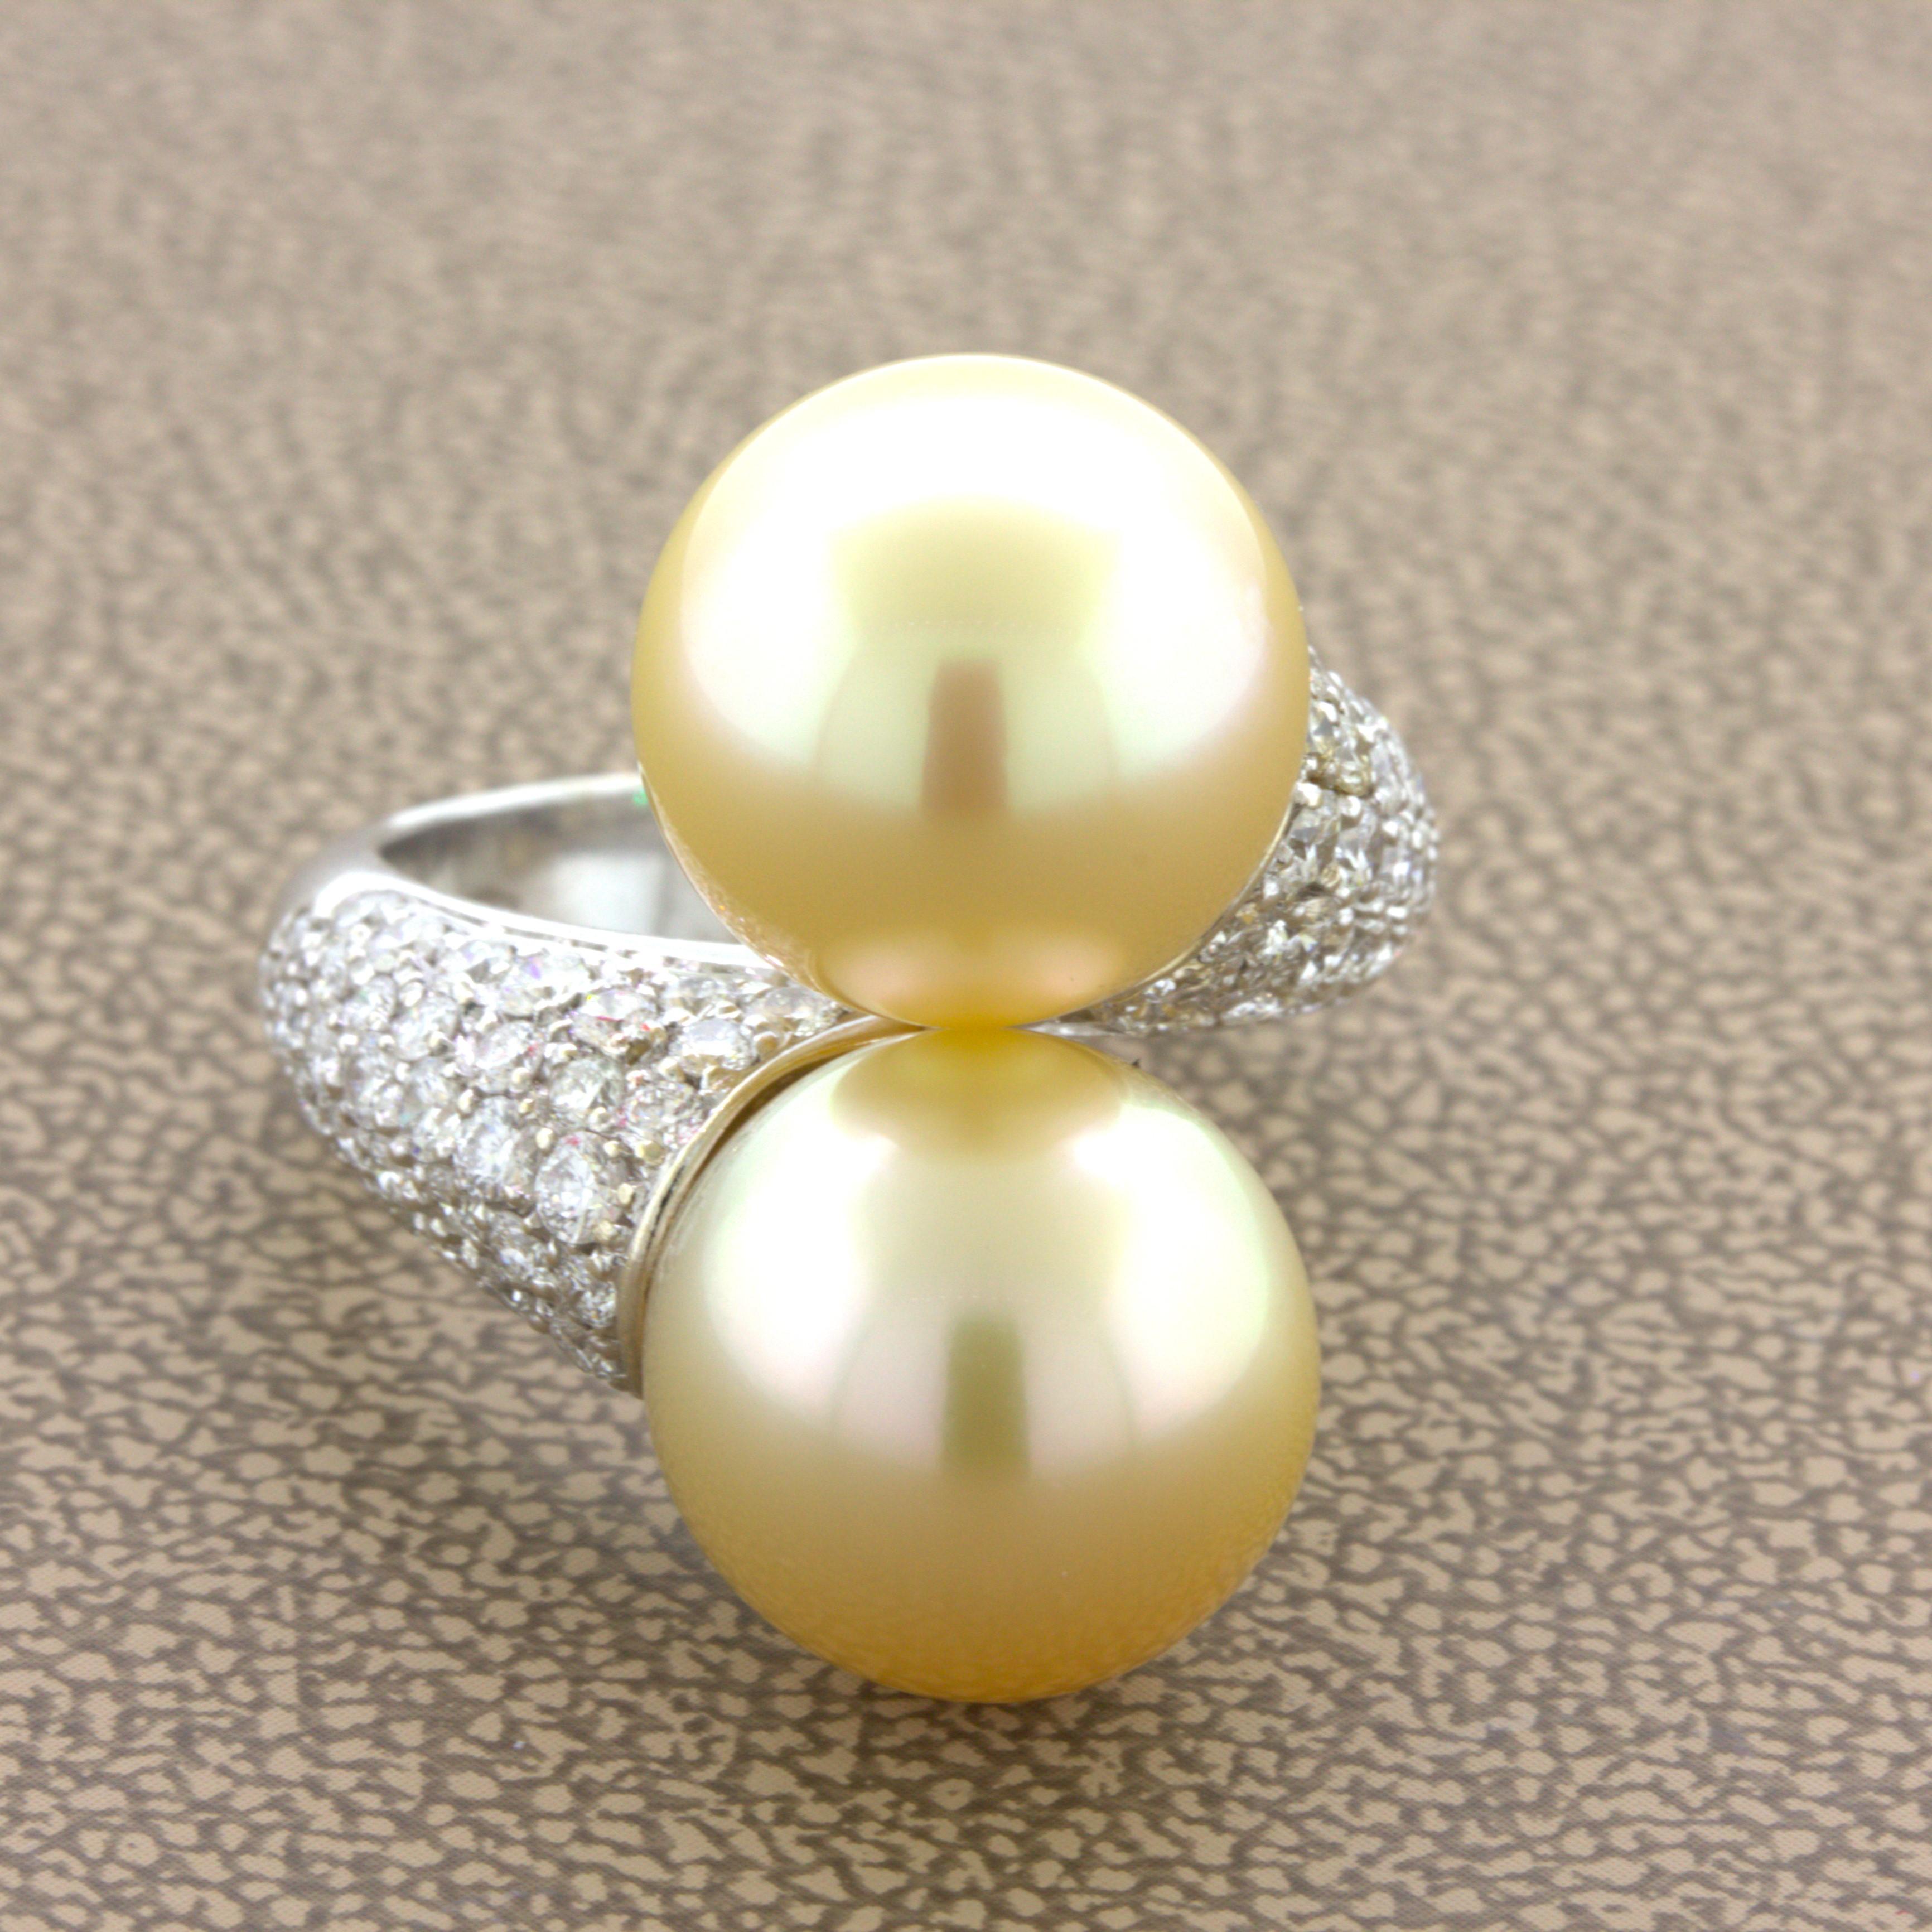 A chic and stylish ring featuring two golden South Sea pearls. They measure 12.5mm each in diameter and match in their bright golden color with excellent nacre quality making them glow in the light. They are complemented by 1.20 carats of bright